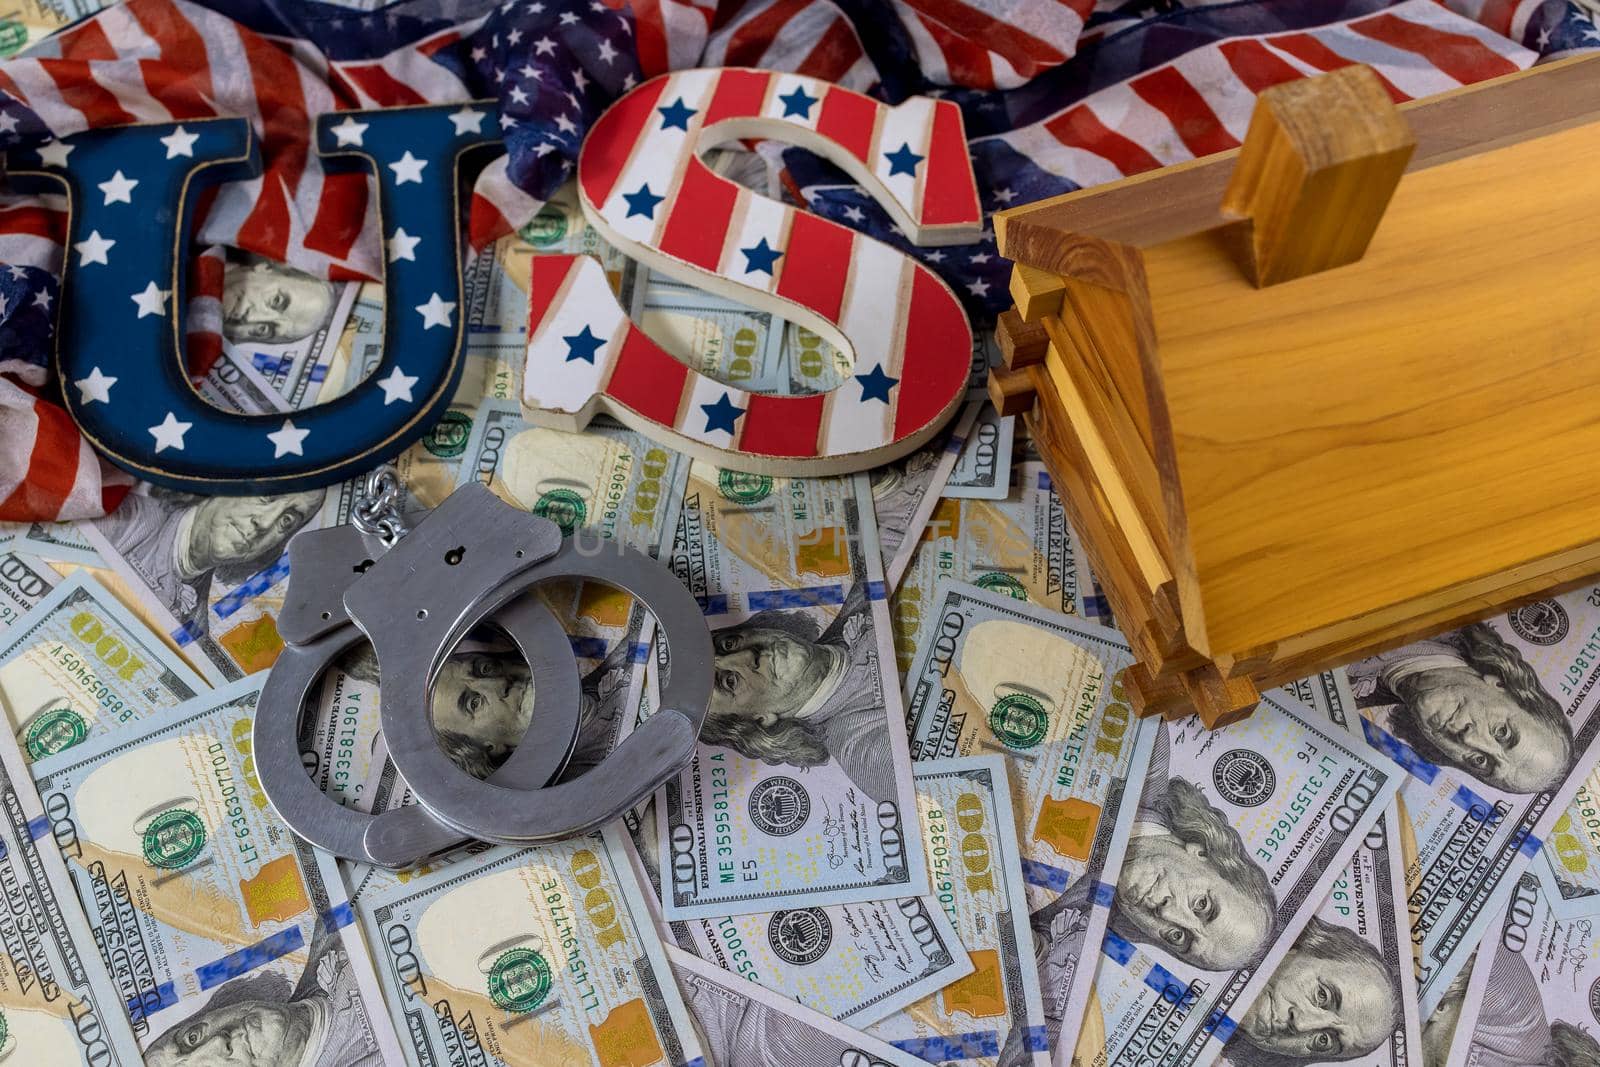 Judge american sanctions the court imposed an arrest to on house of property with US dollars banknotes handcuffs Judge gavel